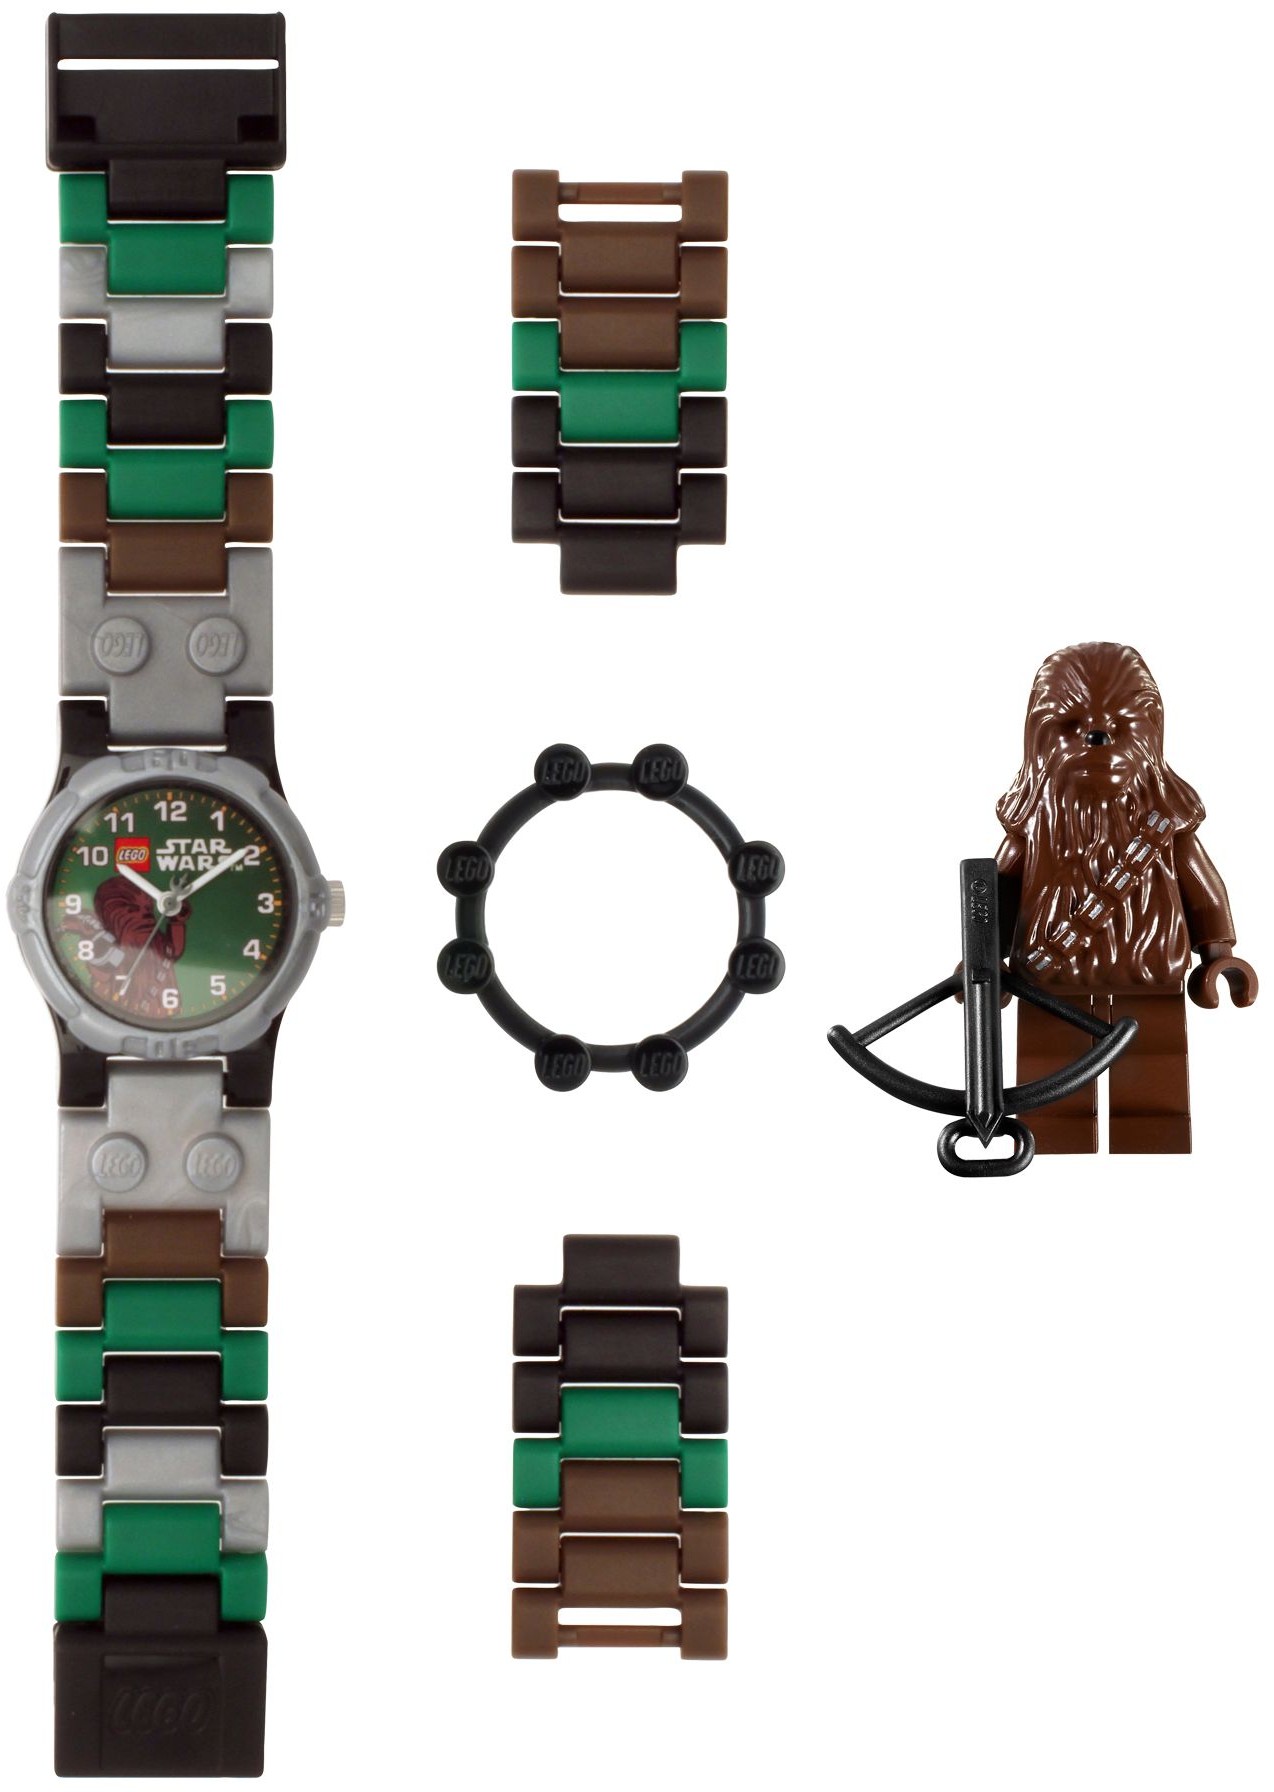 Star Wars Episode VII: The Force Awakens Chewbacca Silicone Strap Watch |  Star Wars The Force Awakens Chewbacca Watch | Popcultcha